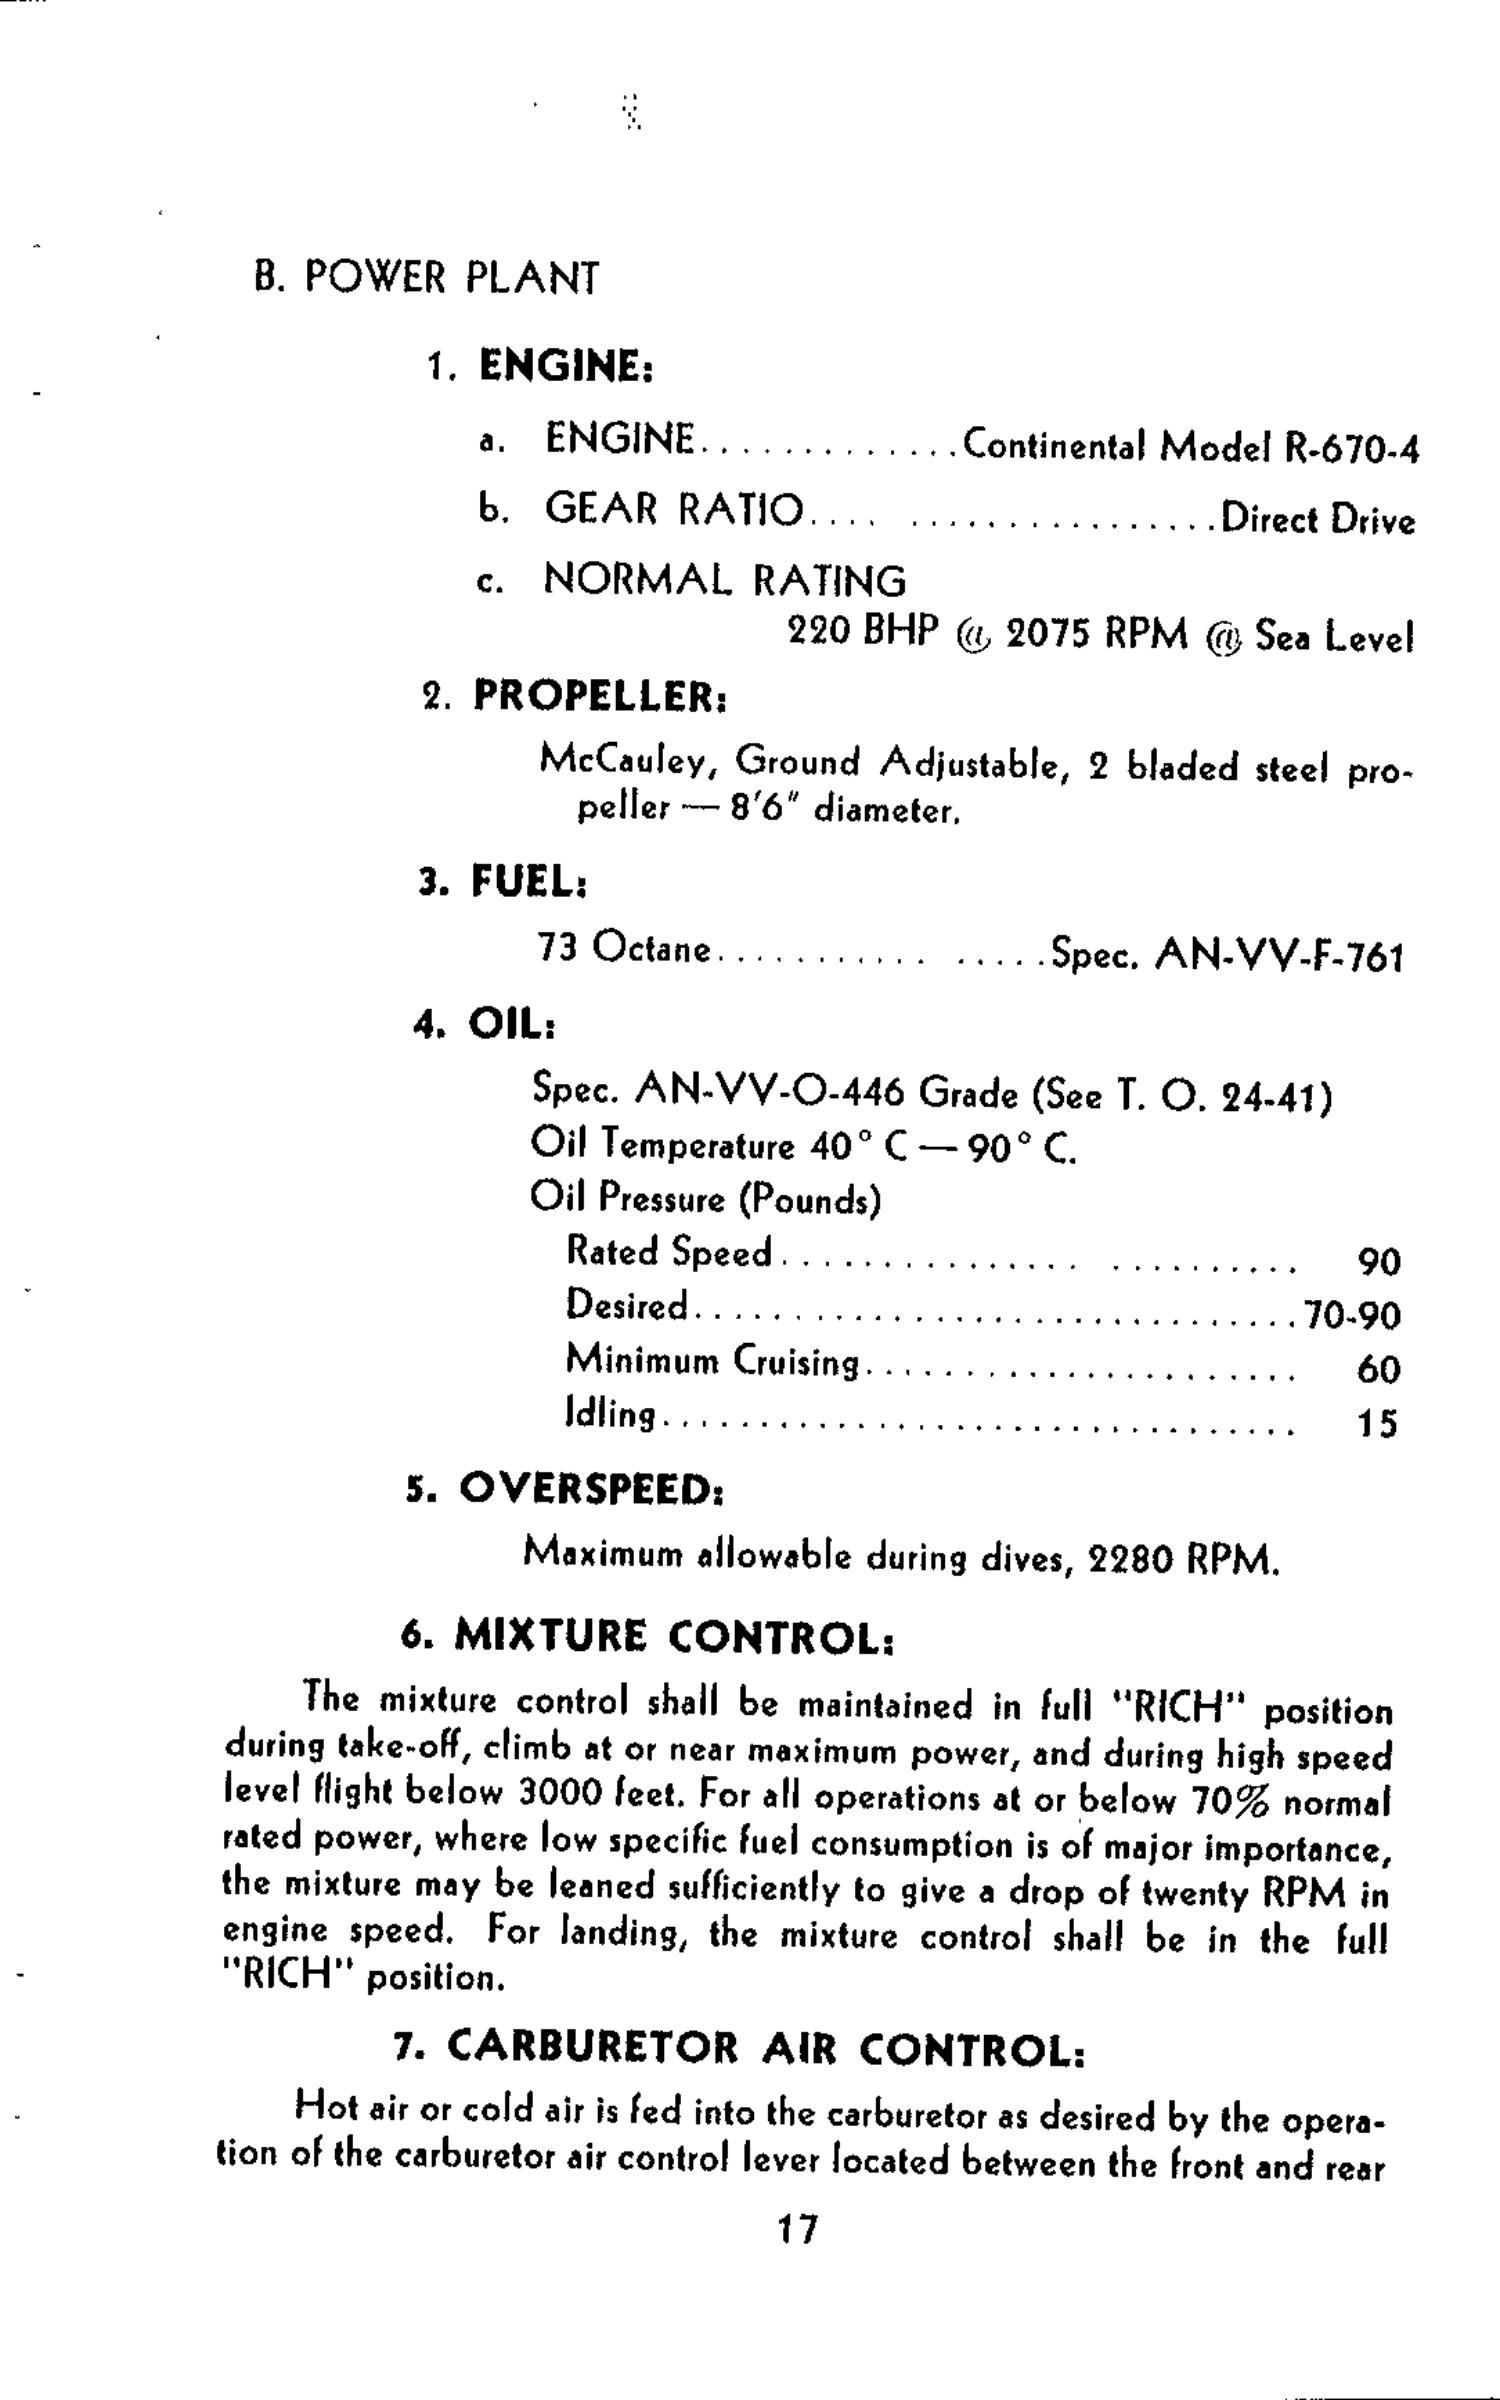 Sample page 18 from AirCorps Library document: Pilot's Handbook - Stearman - N2S-4